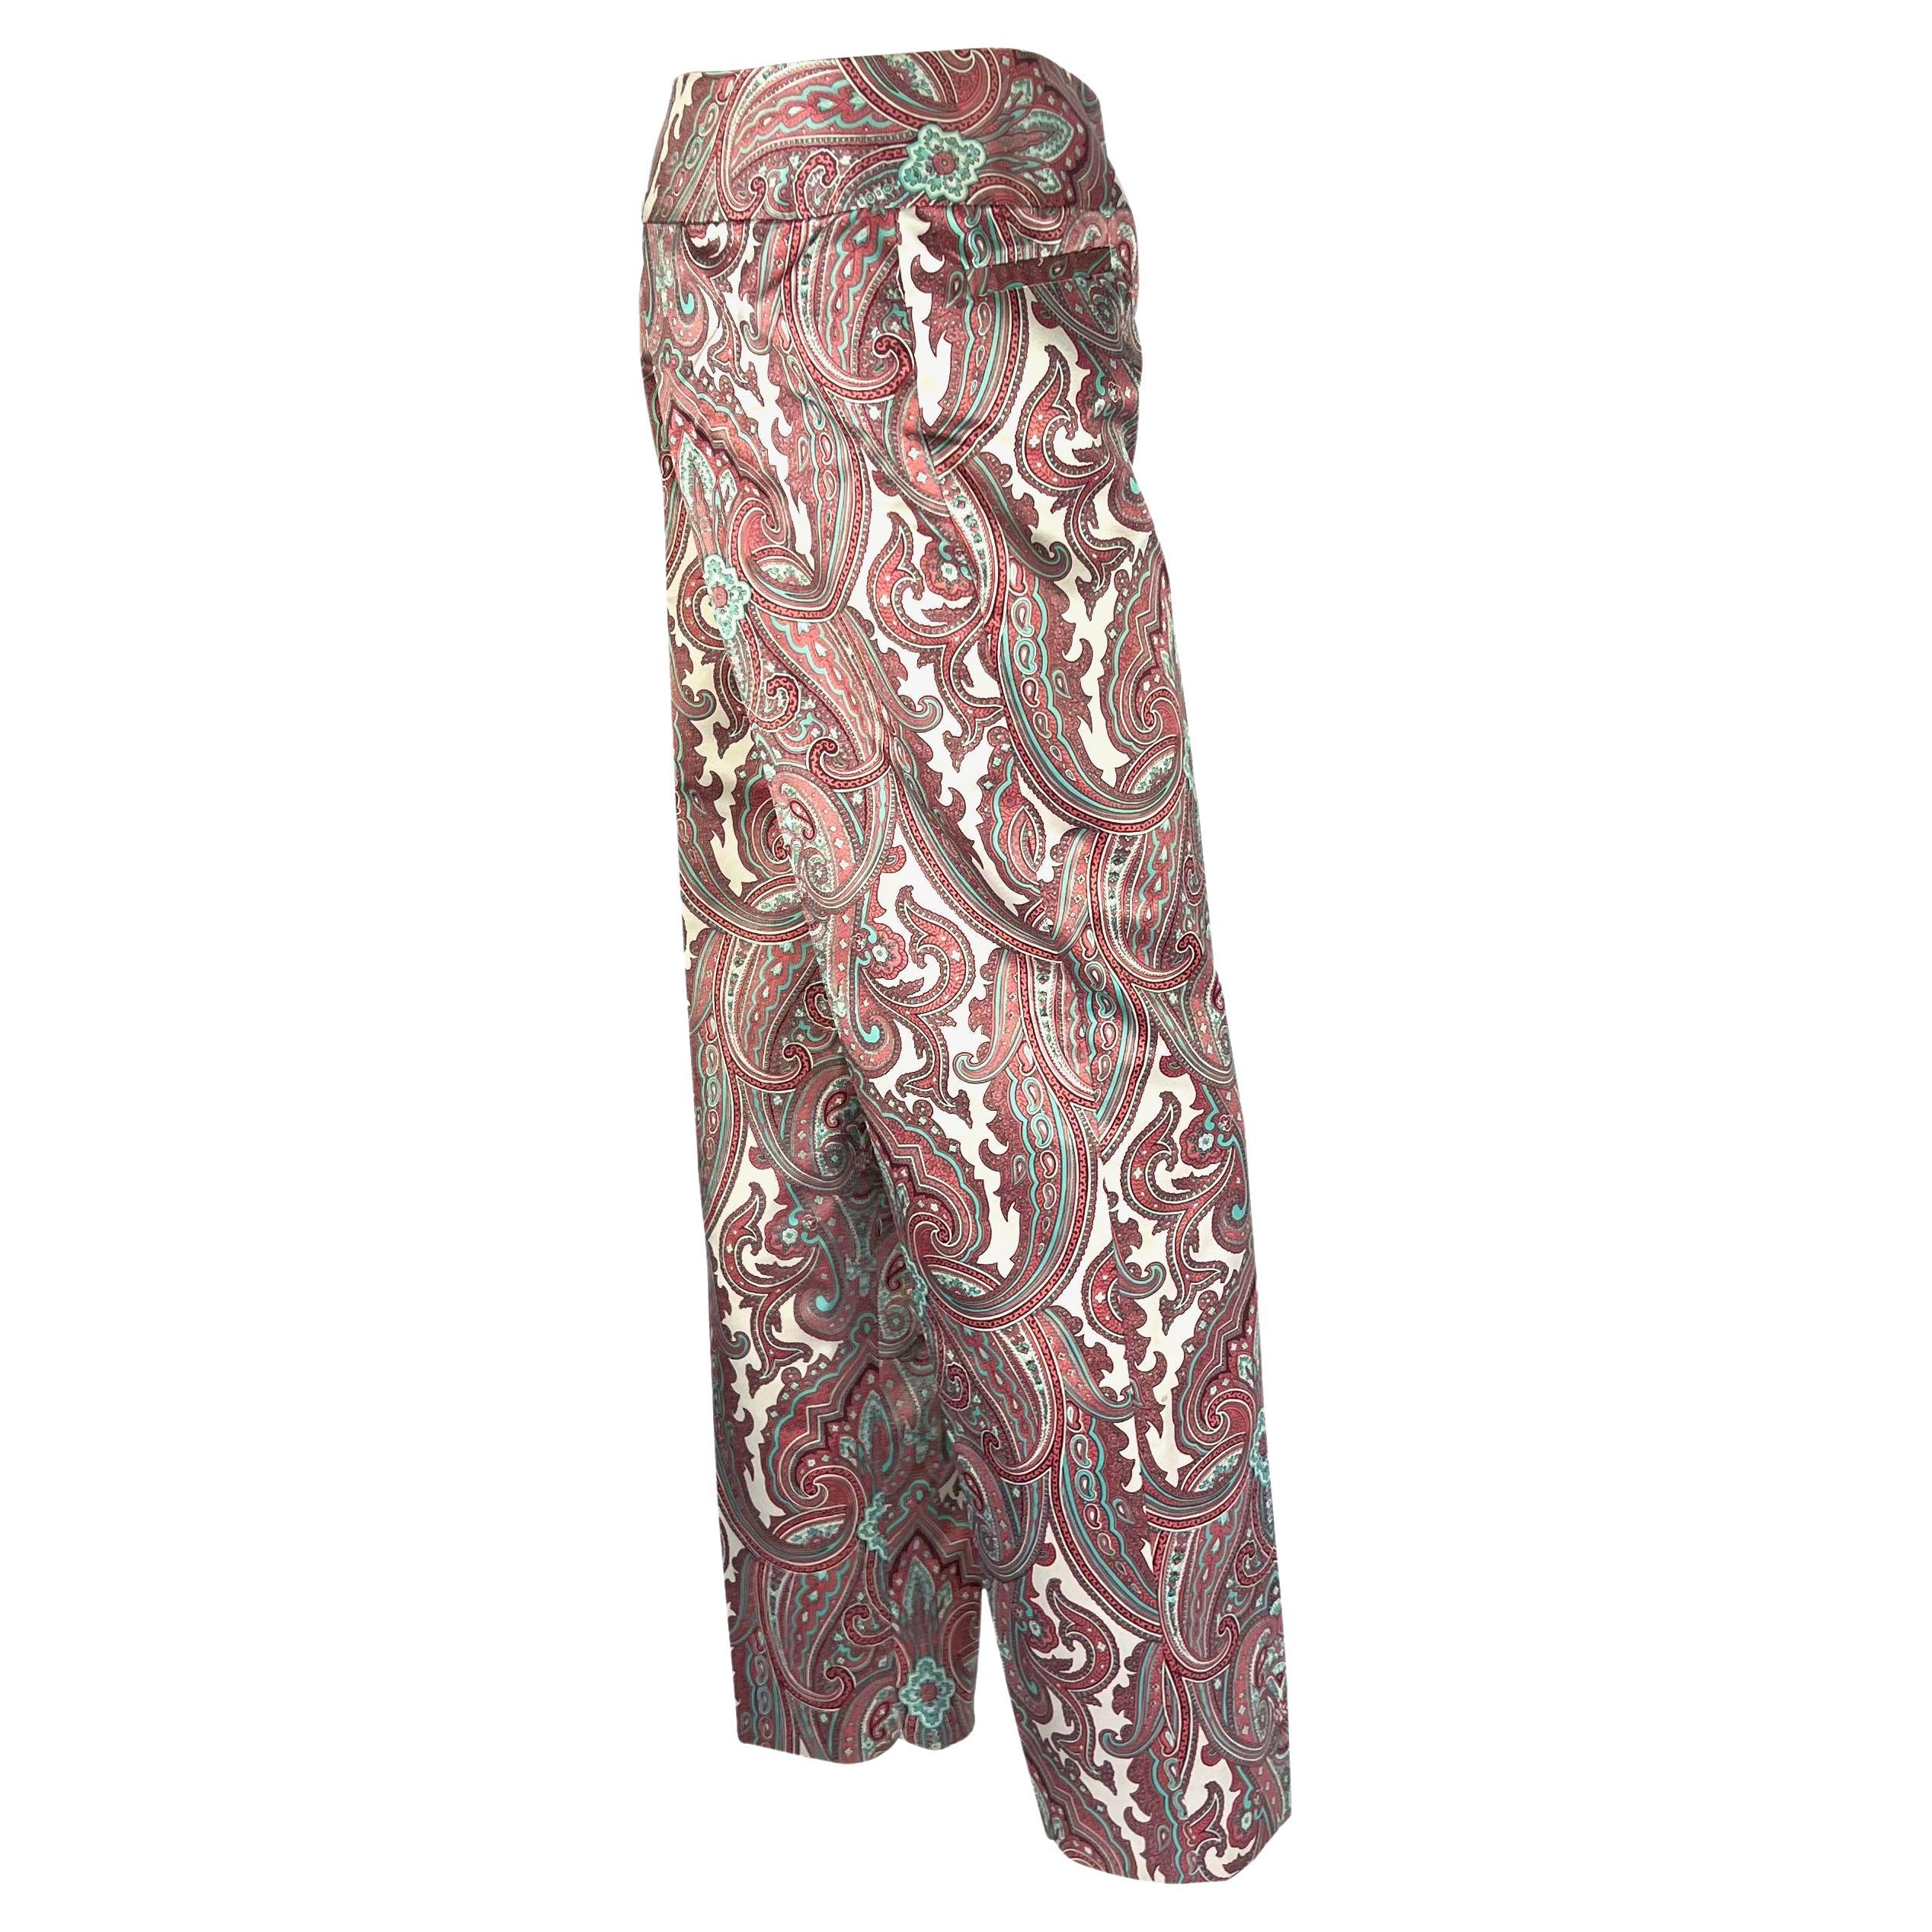 S/S 2000 Dolce & Gabbana White Pink Satin Paisley Print Tapered Cropped Pants For Sale 1